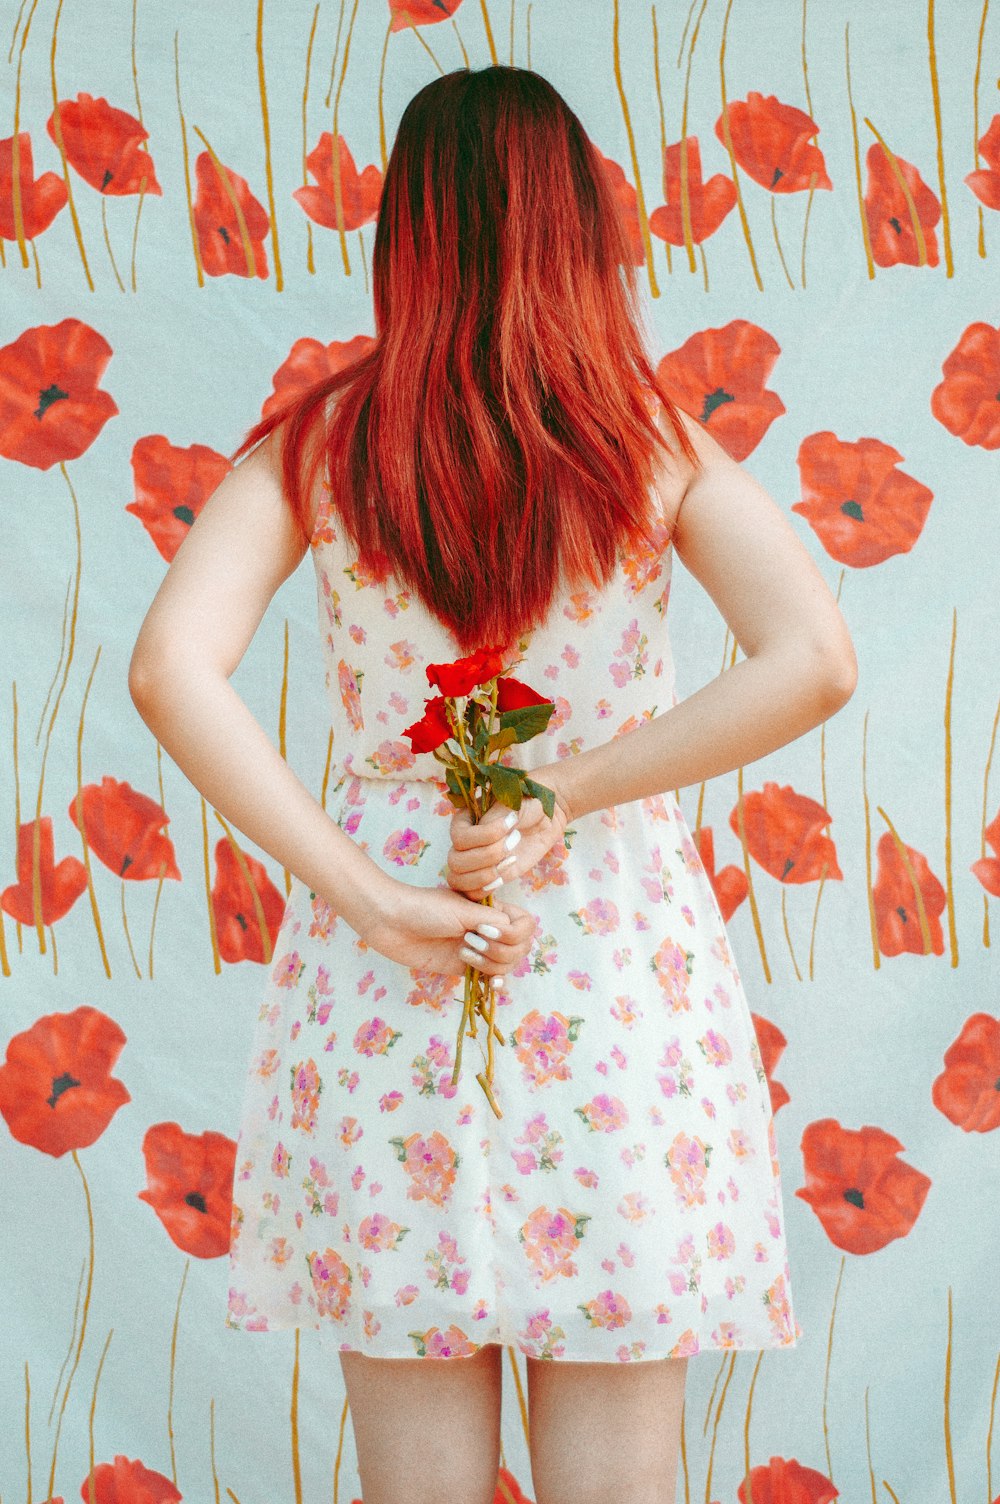 woman hides red roses from her back